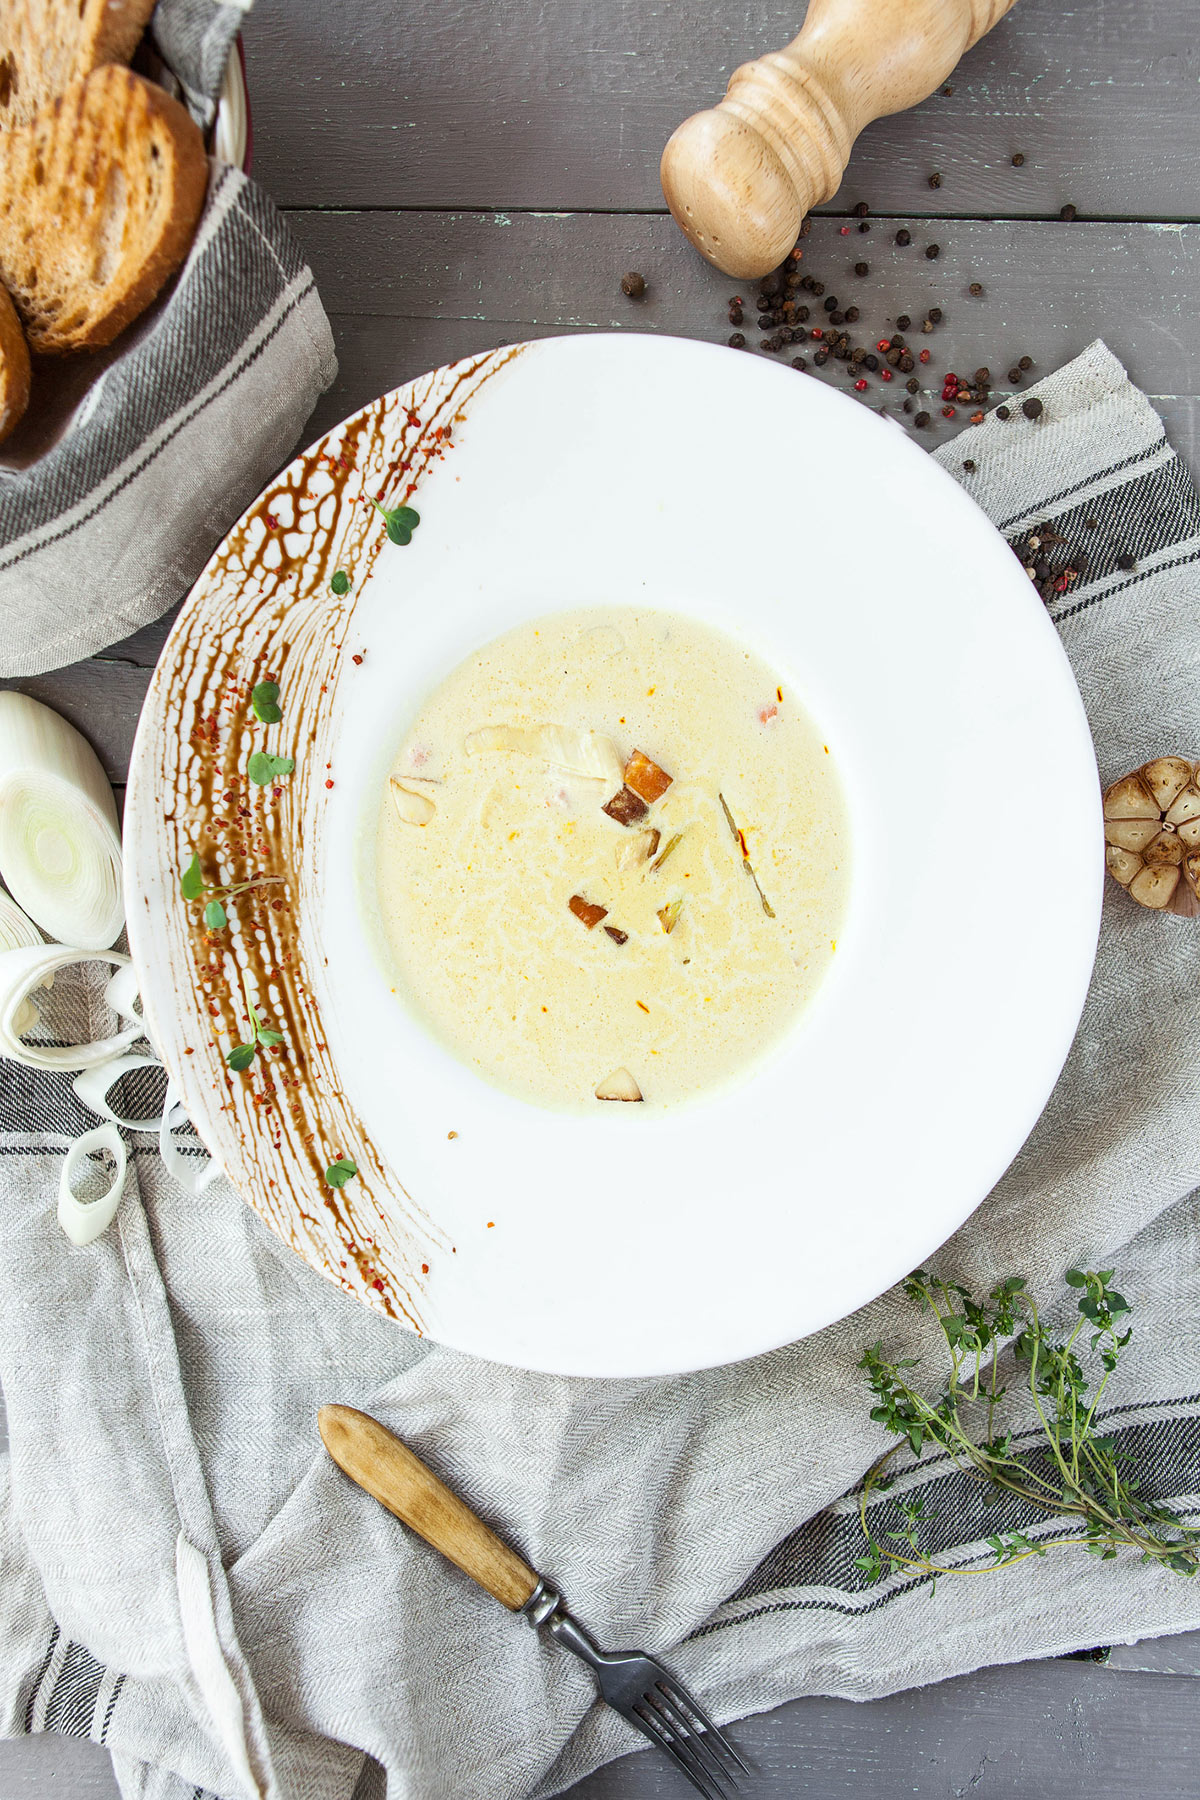 Rich and Creamy – Parsnip Soup